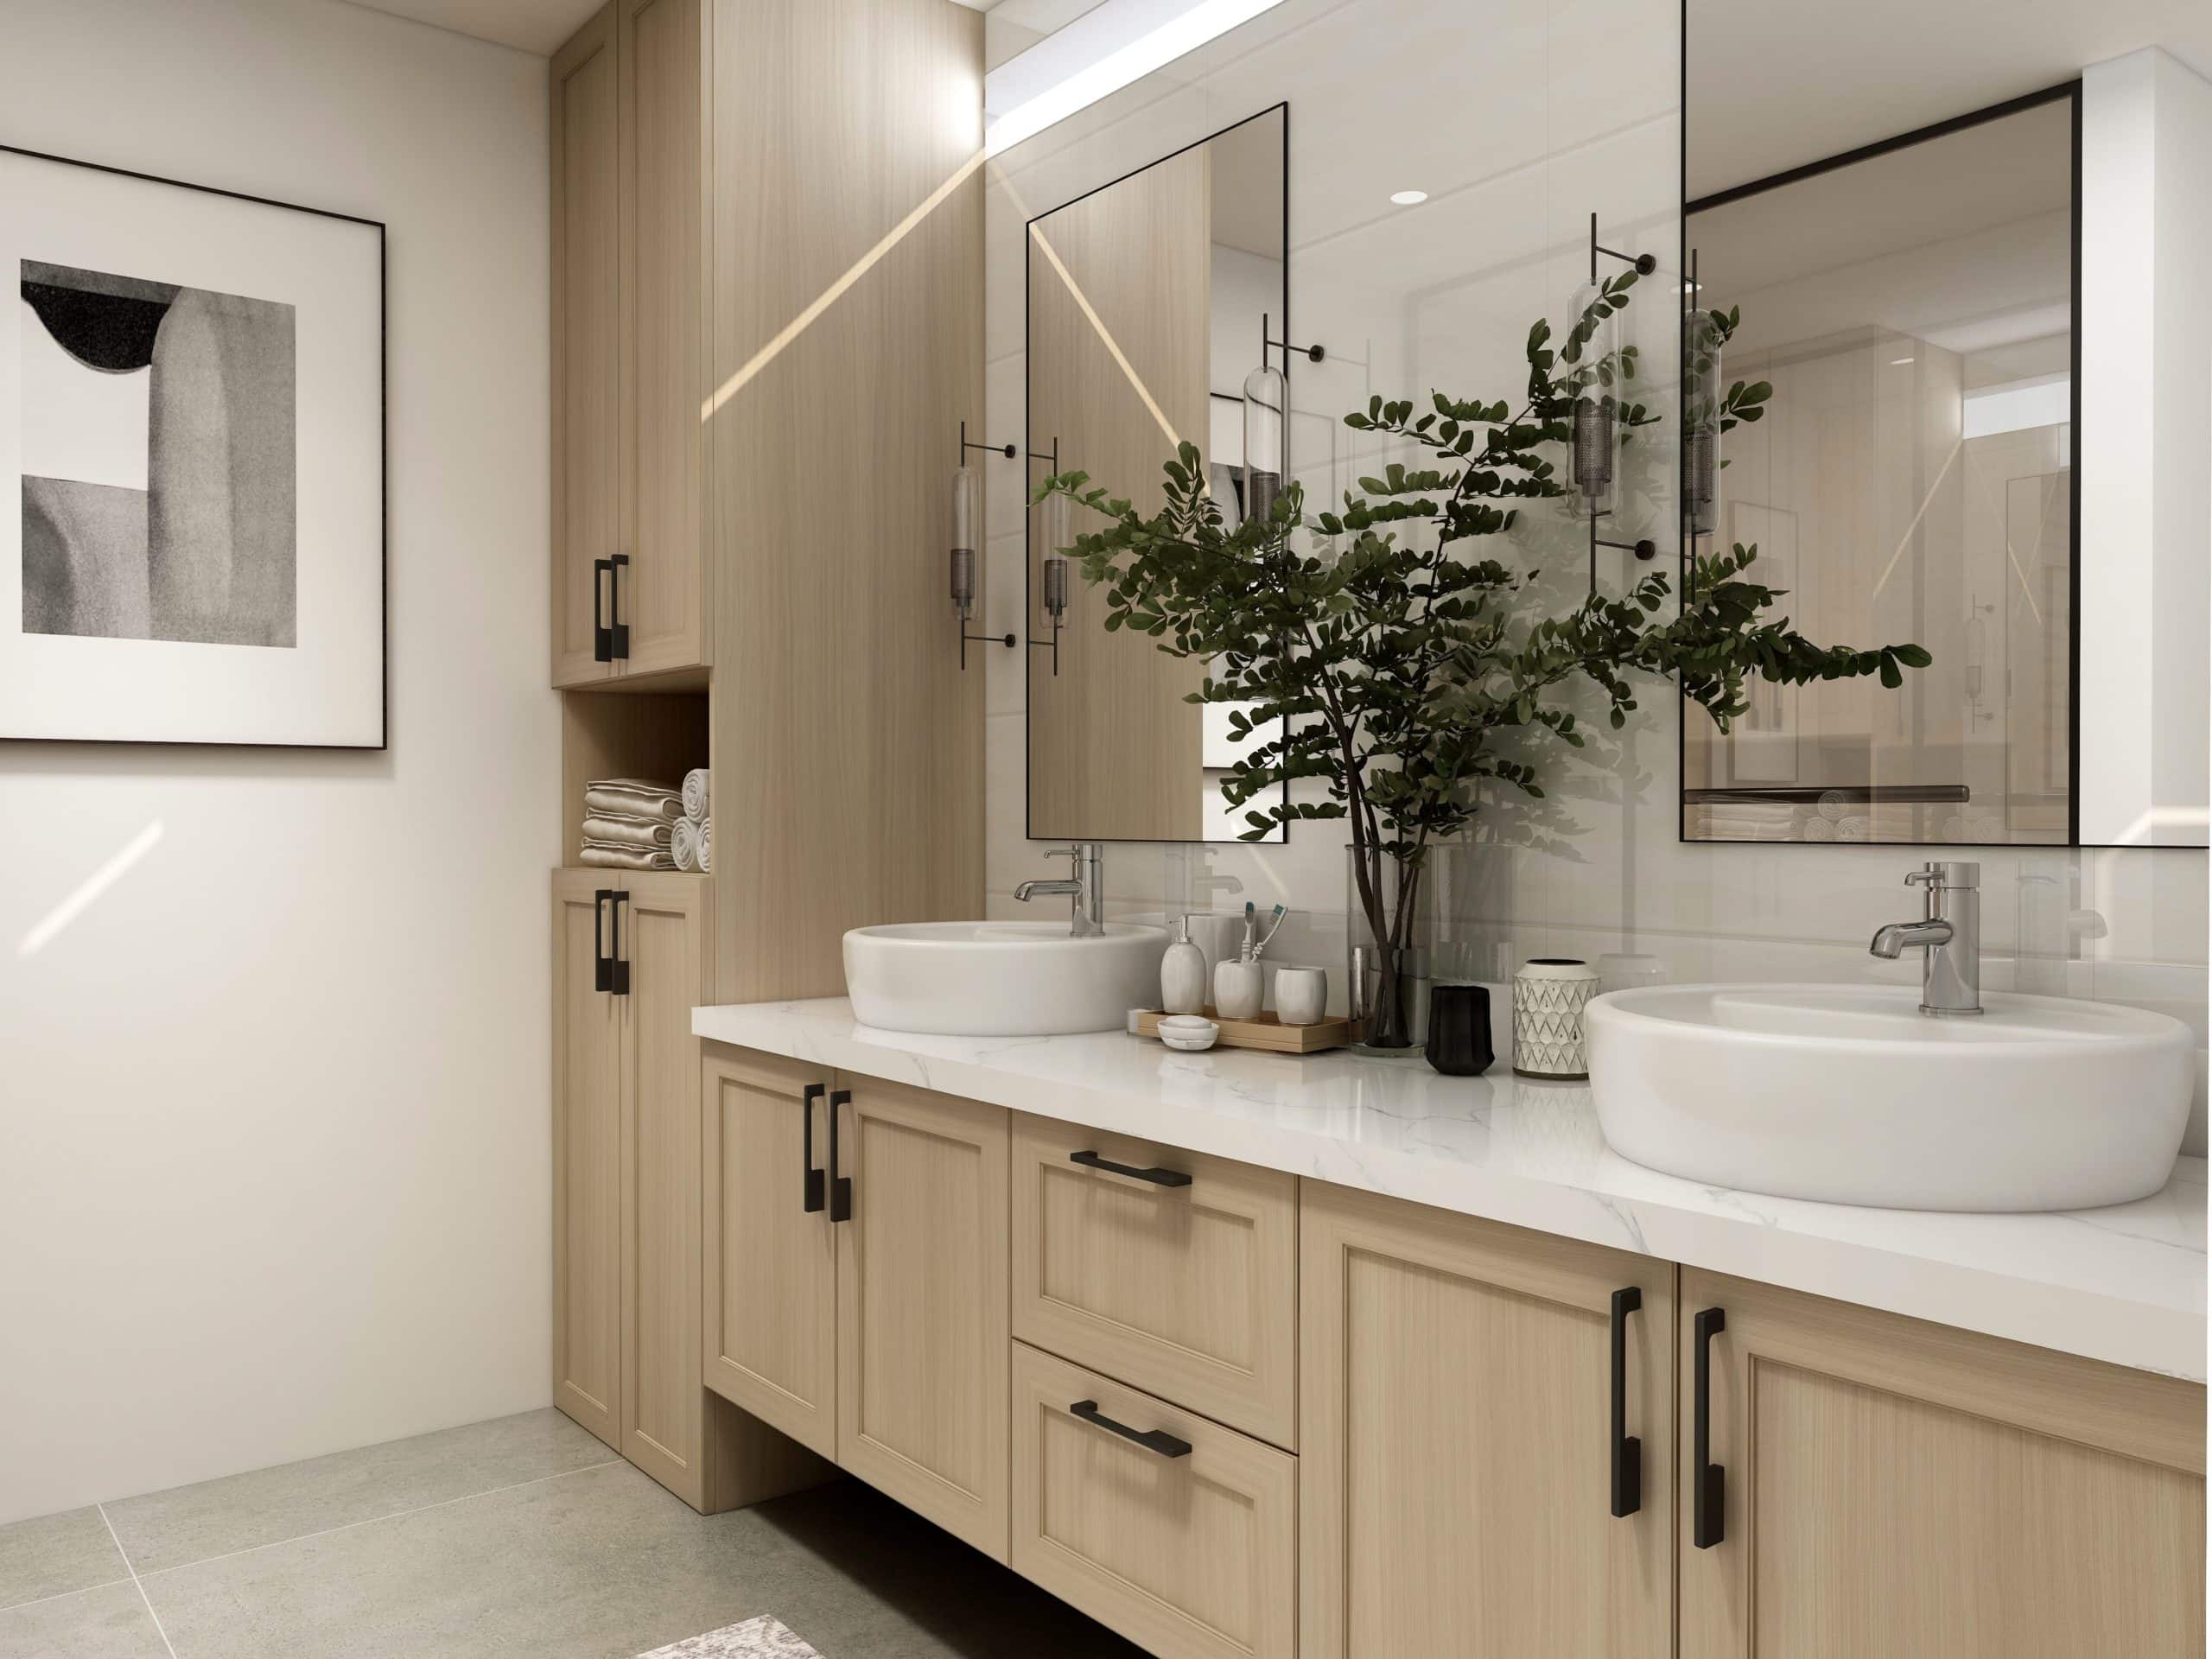 A modern residential bathroom with two mirrors.